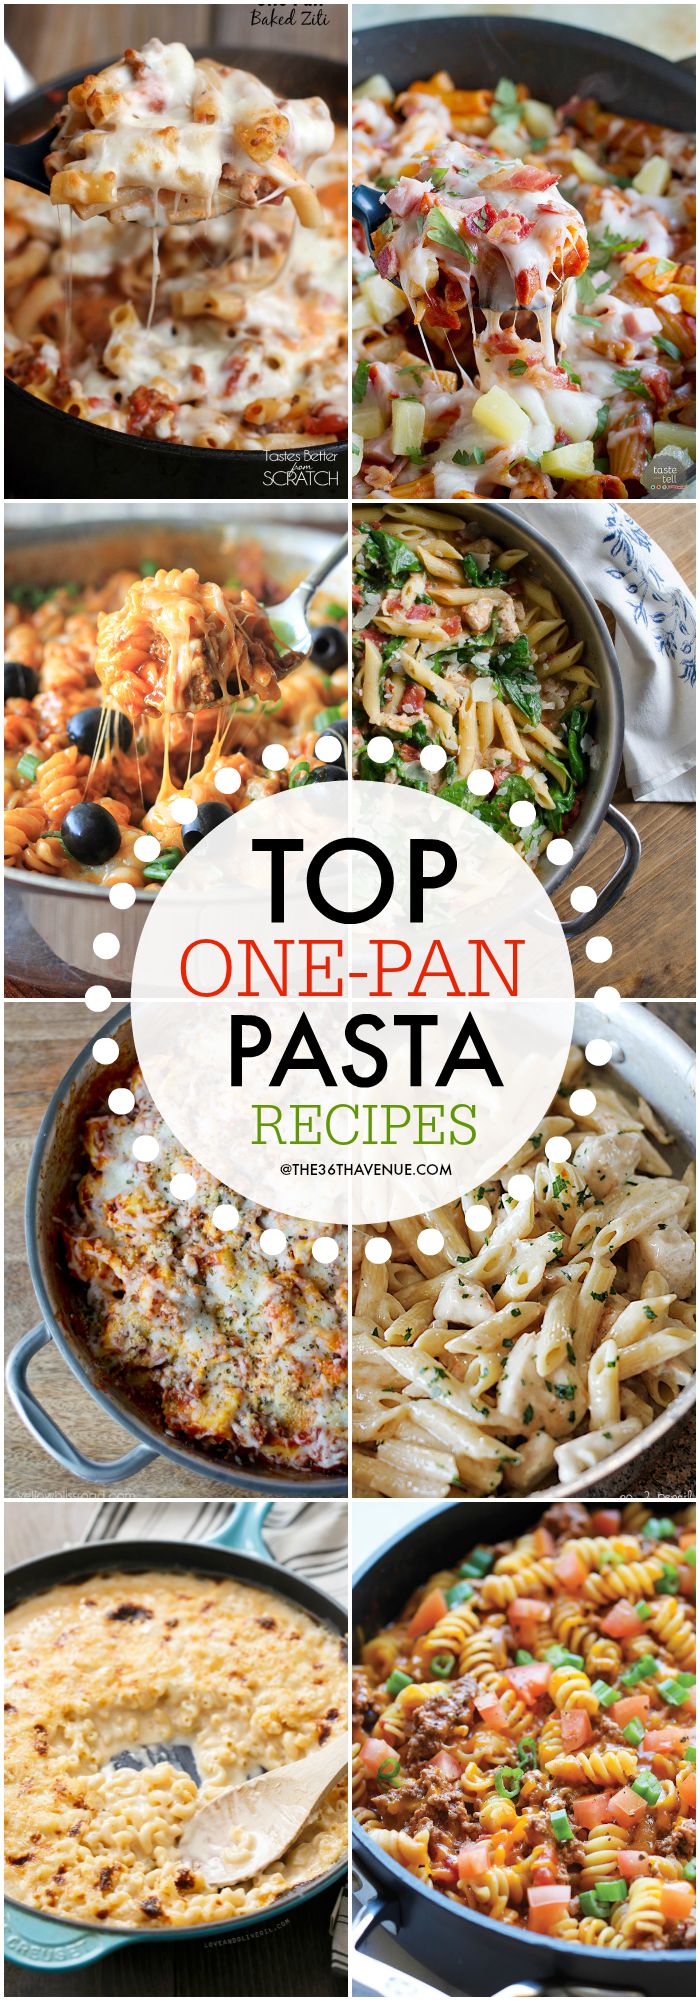 One Pan Recipes at the36thavenue.com